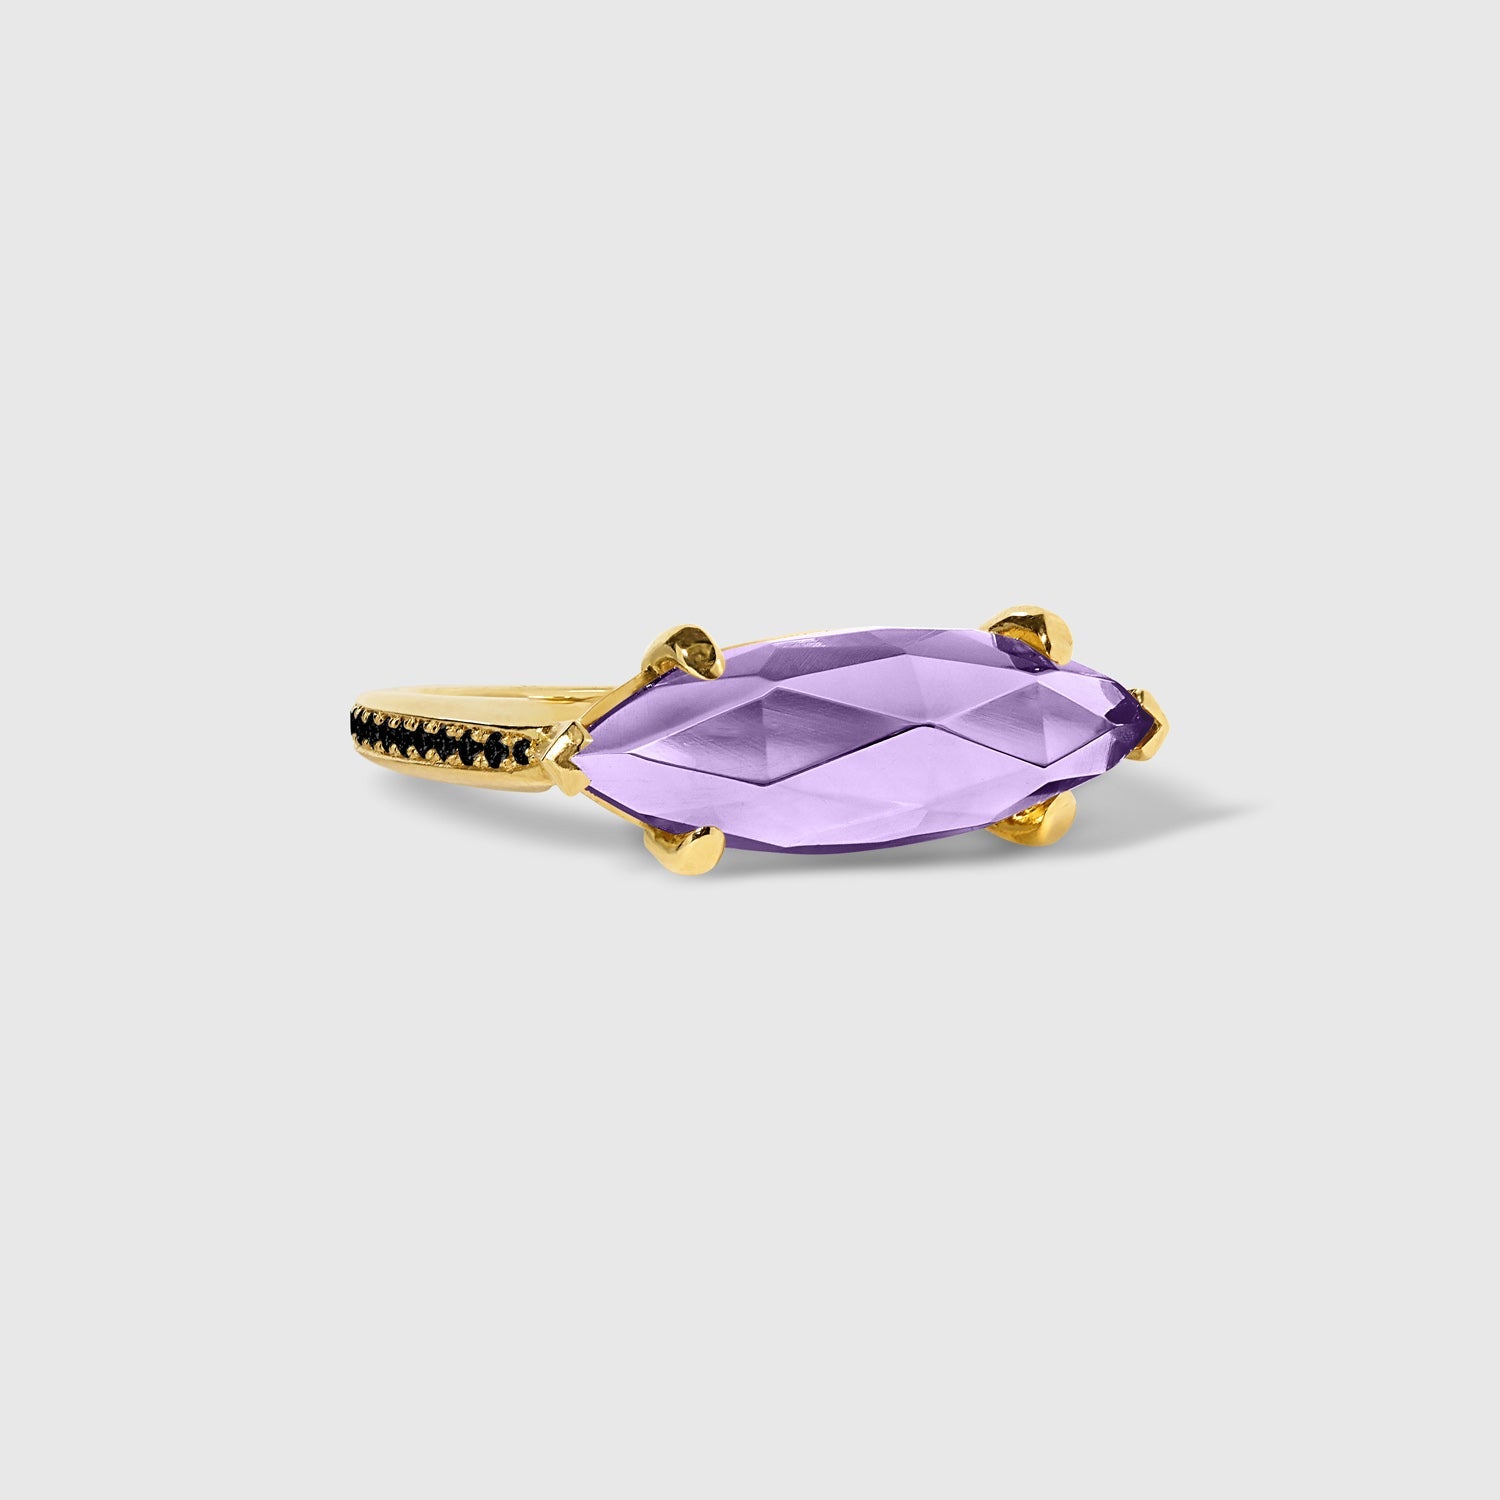 Amethyst & Black Diamonds - Marquise Ring in Solid Gold – Midnight Shine Set - Aurora Laffite Jewelry